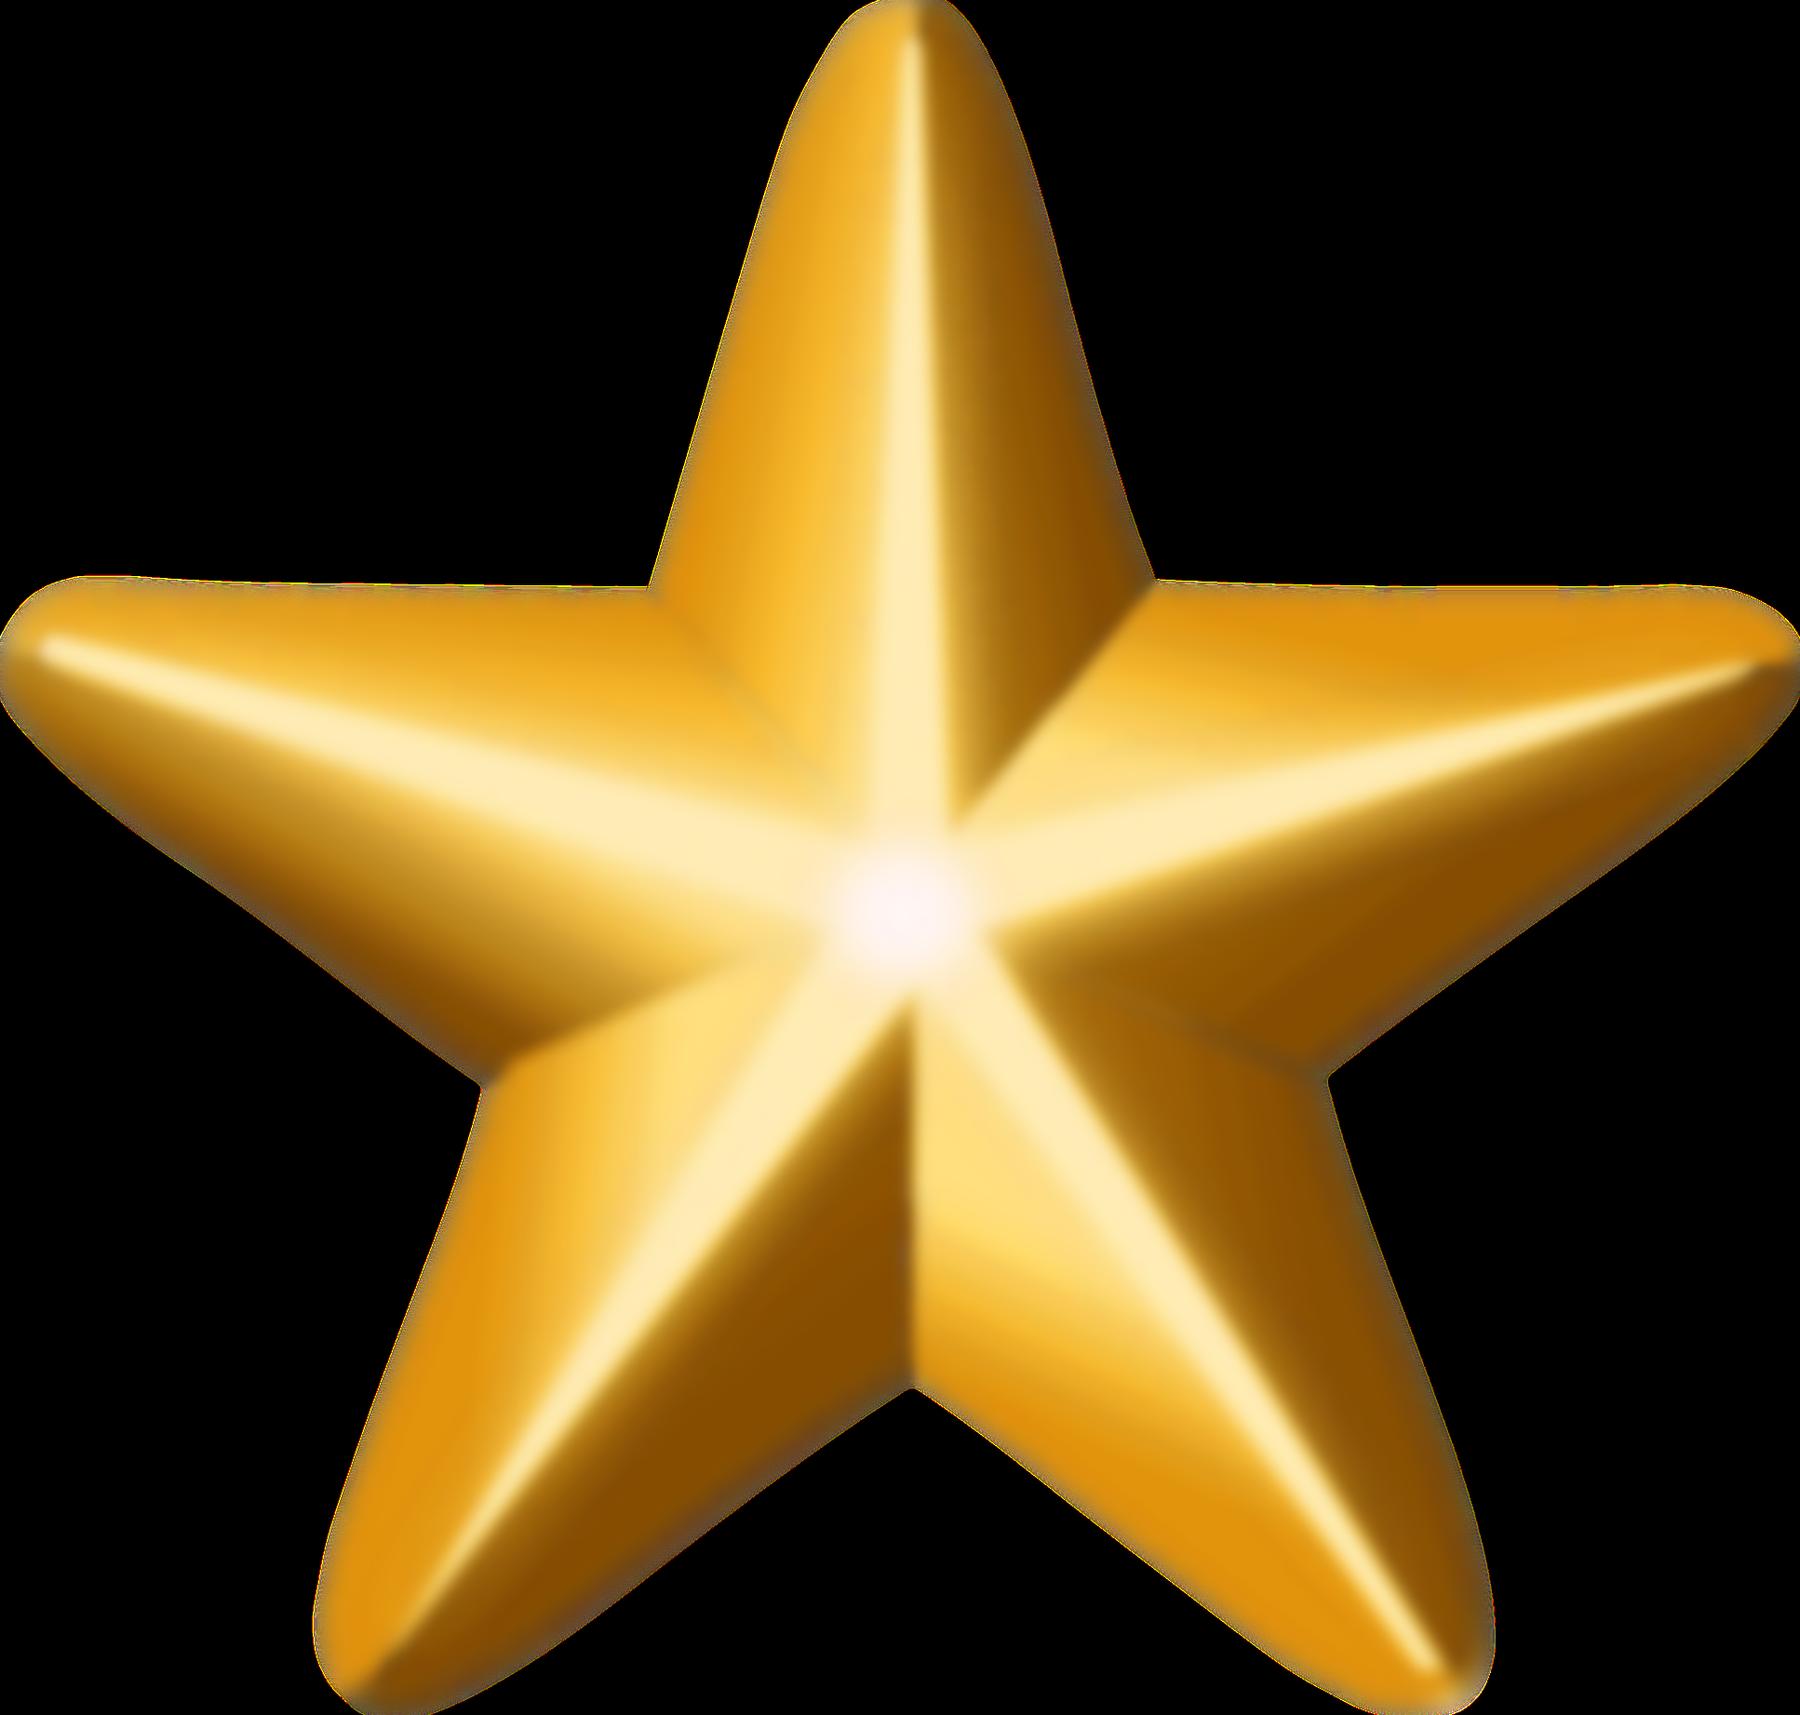 a gold star on a black background - File:Award star (gold).png